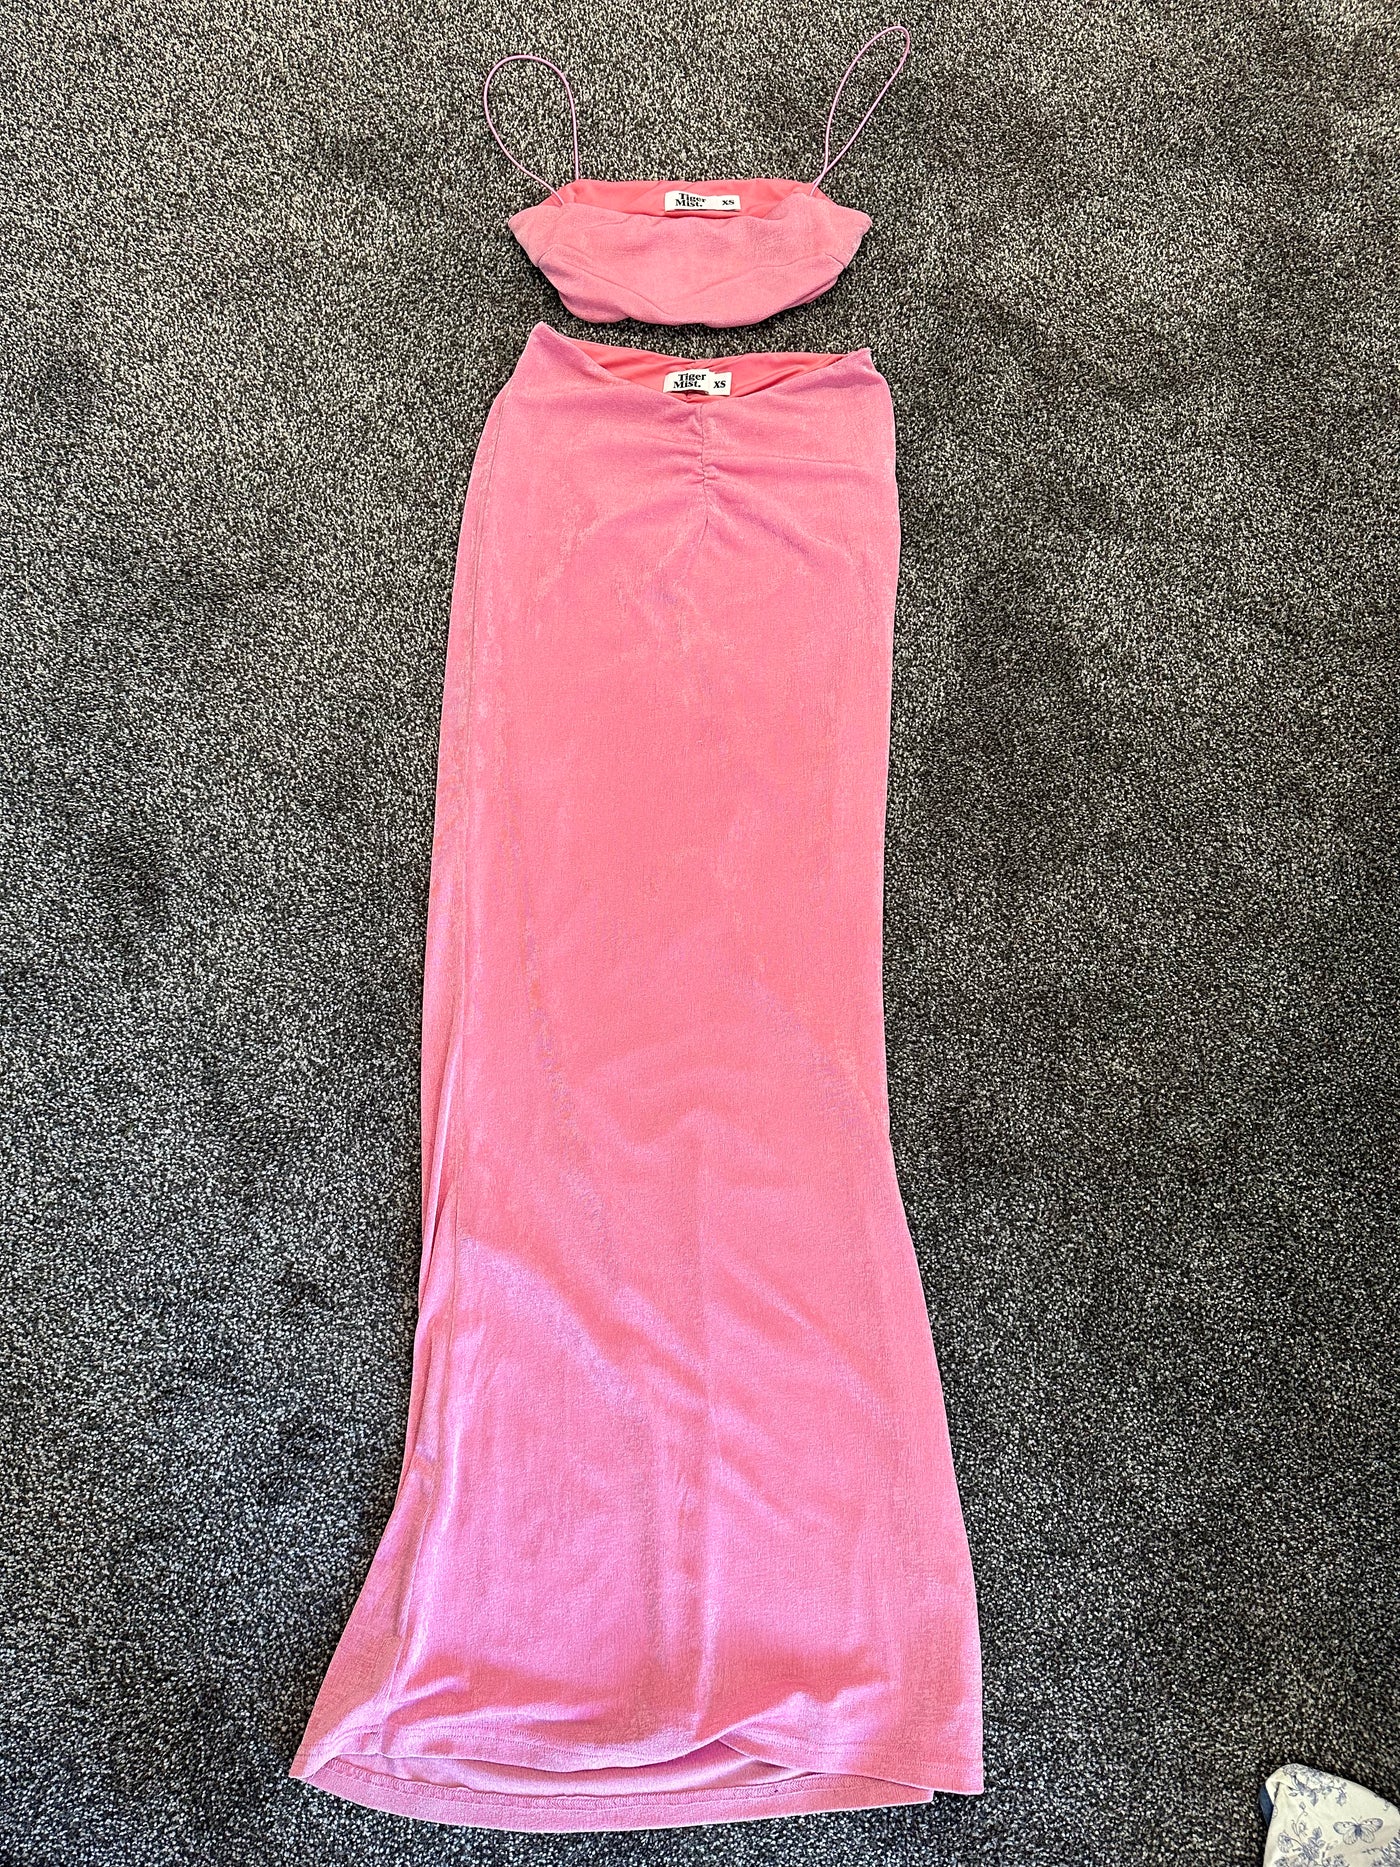 Chantelle Set (Pink) FOR SALE